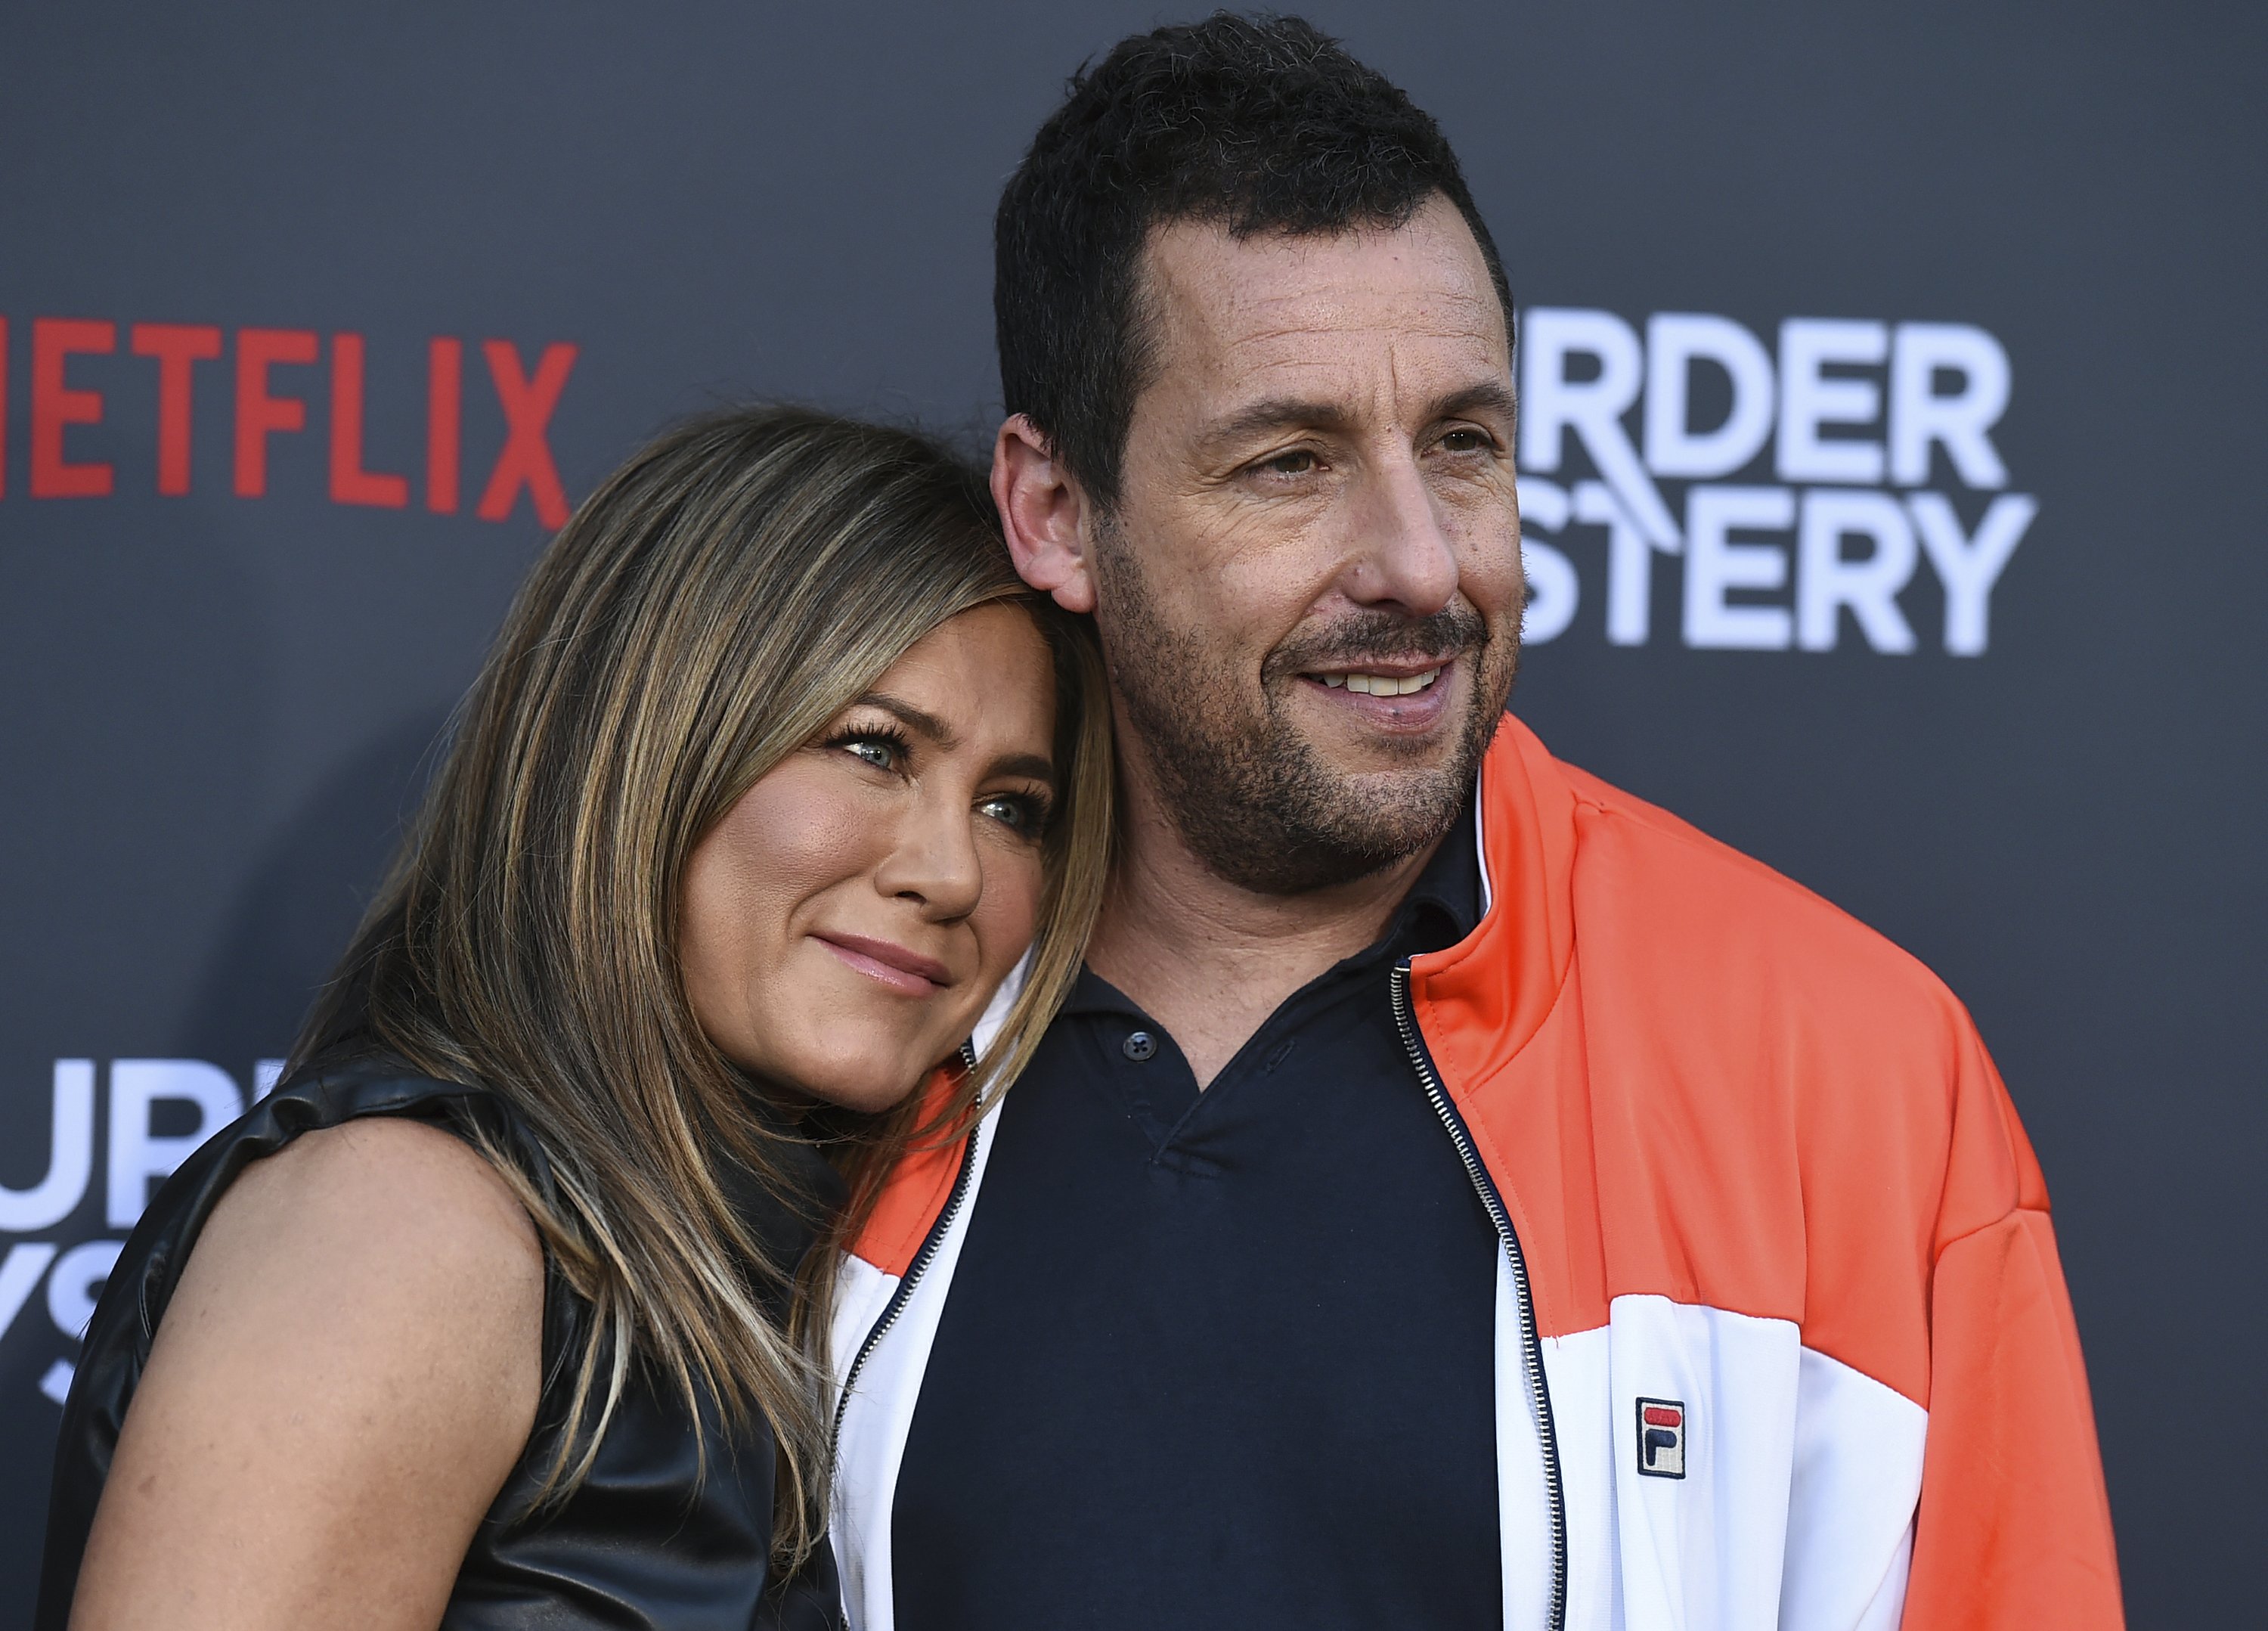 Aniston to Sandler before kissing scenes: 'Oil up the beard'